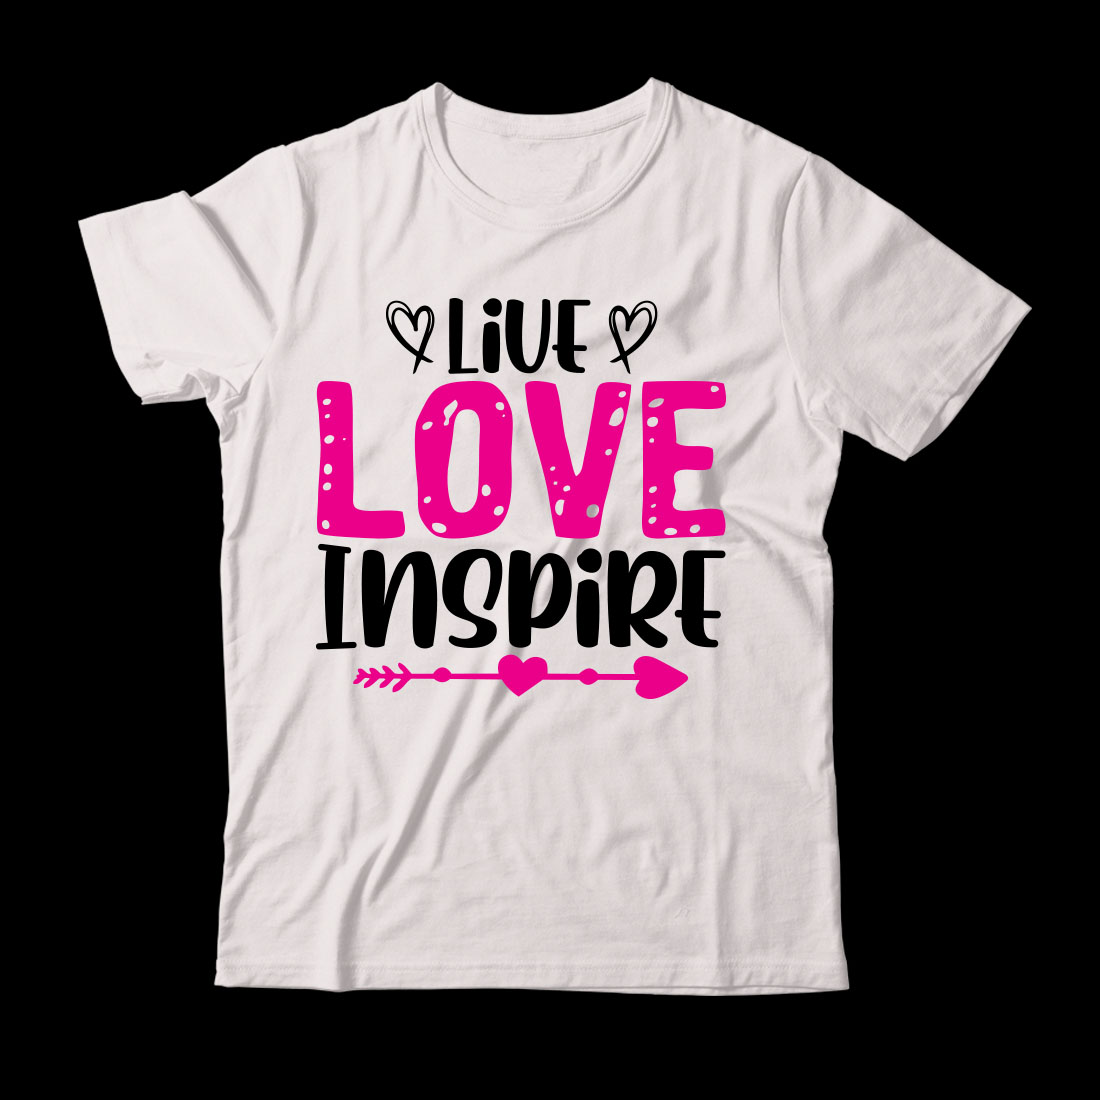 White t - shirt that says live love inspire.